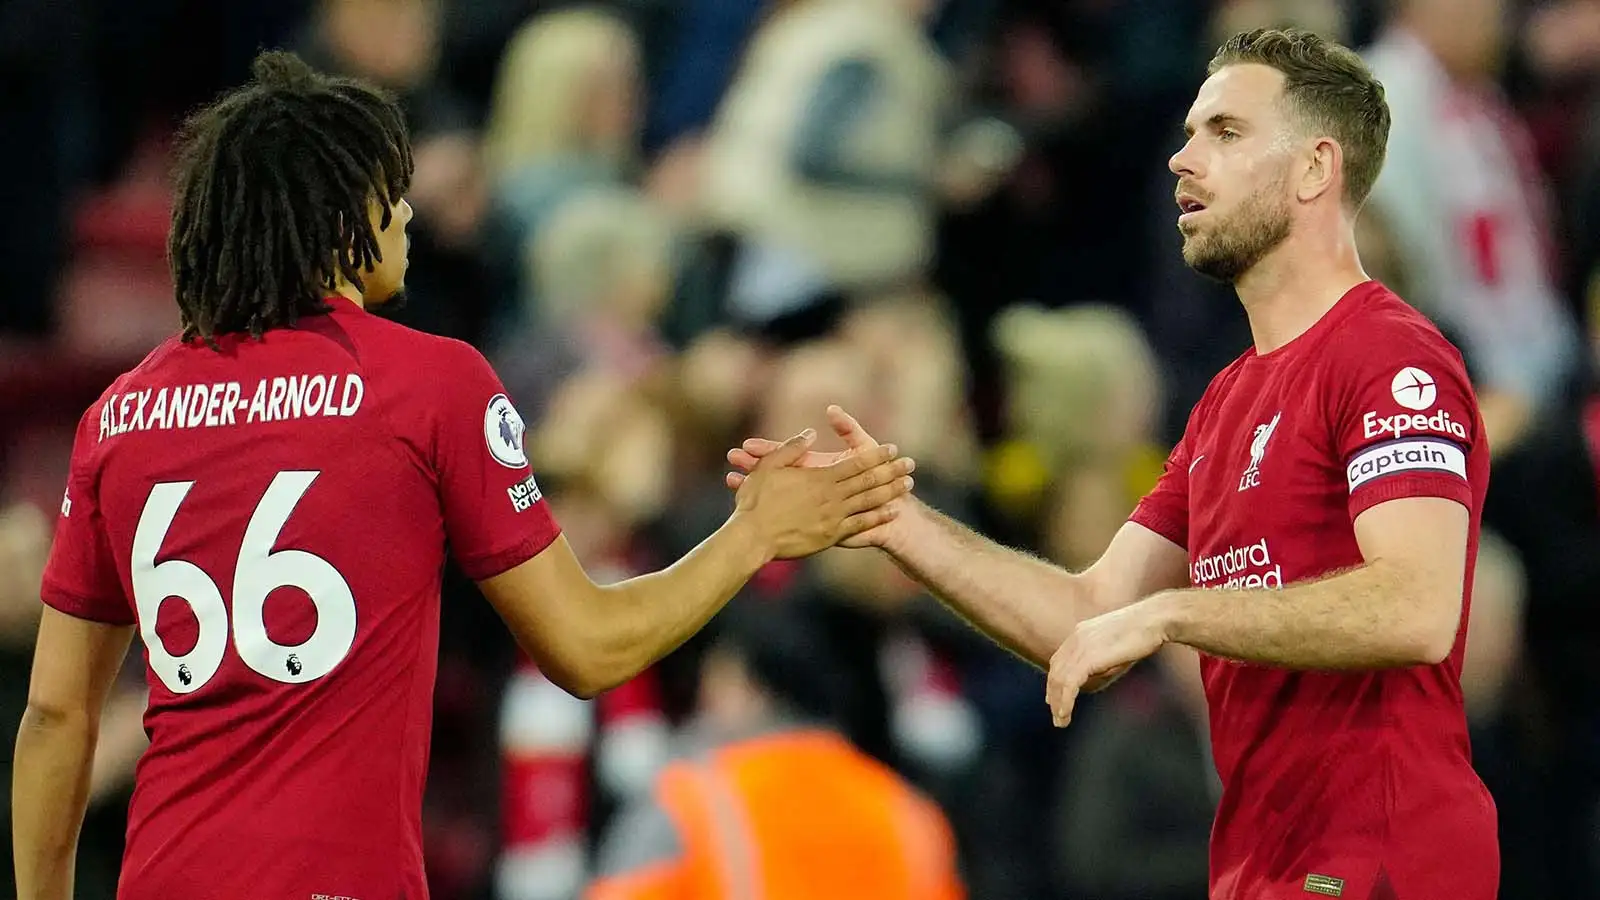 Liverpool's Trent Alexander-Arnold, left, shakes hand with his teammate Jordan Henderson at the end of the English Premier League soccer match between Liverpool and Fulham, at Anfield Stadium, Liverpool